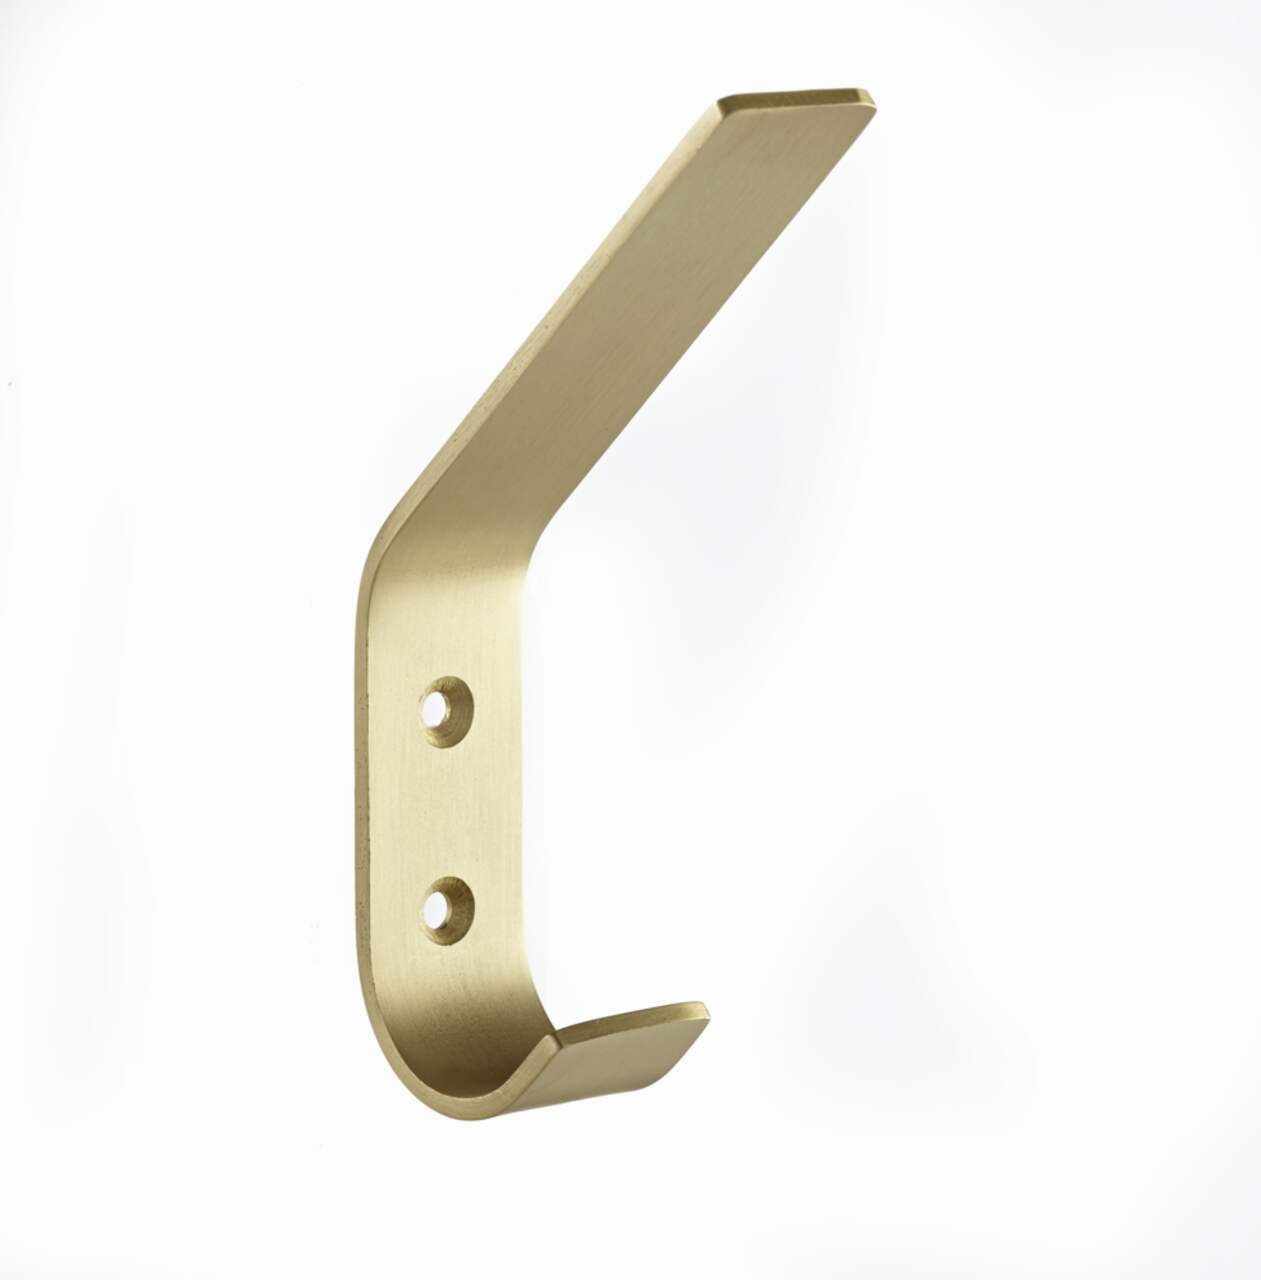 https://media-www.canadiantire.ca/product/living/home-decor/decor-accents/0467396/canvas-bent-metal-hook-brass-1175a0ac-b4ae-4b98-9f56-3744ed1ac1df.png?imdensity=1&imwidth=640&impolicy=mZoom